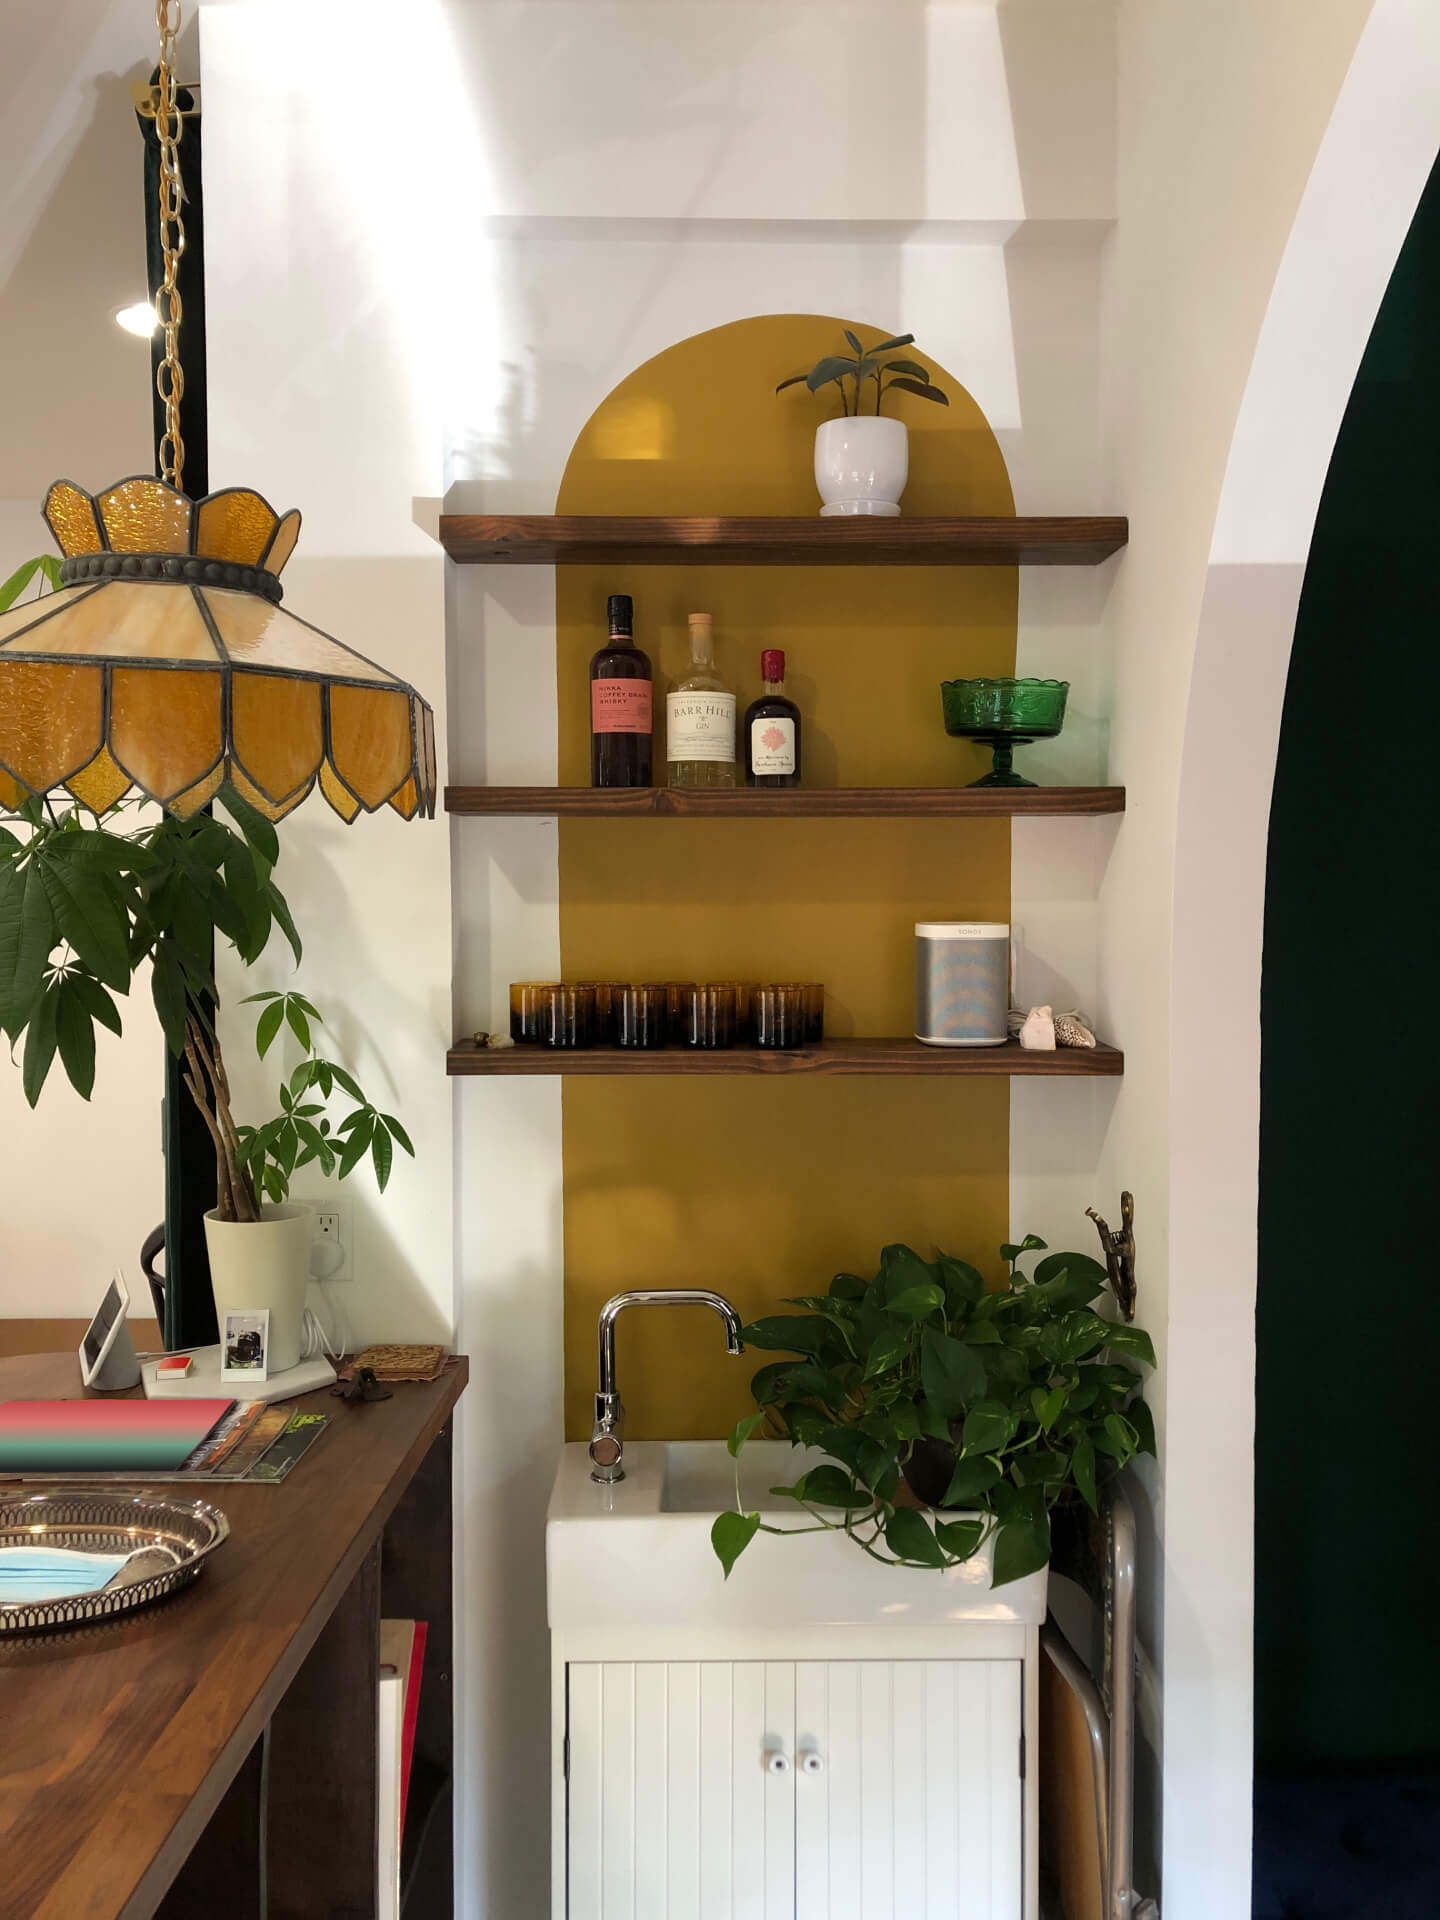 Floating shelves with plants, cocktail glasses, and whiskey bottles, with a painted gold archway behind them